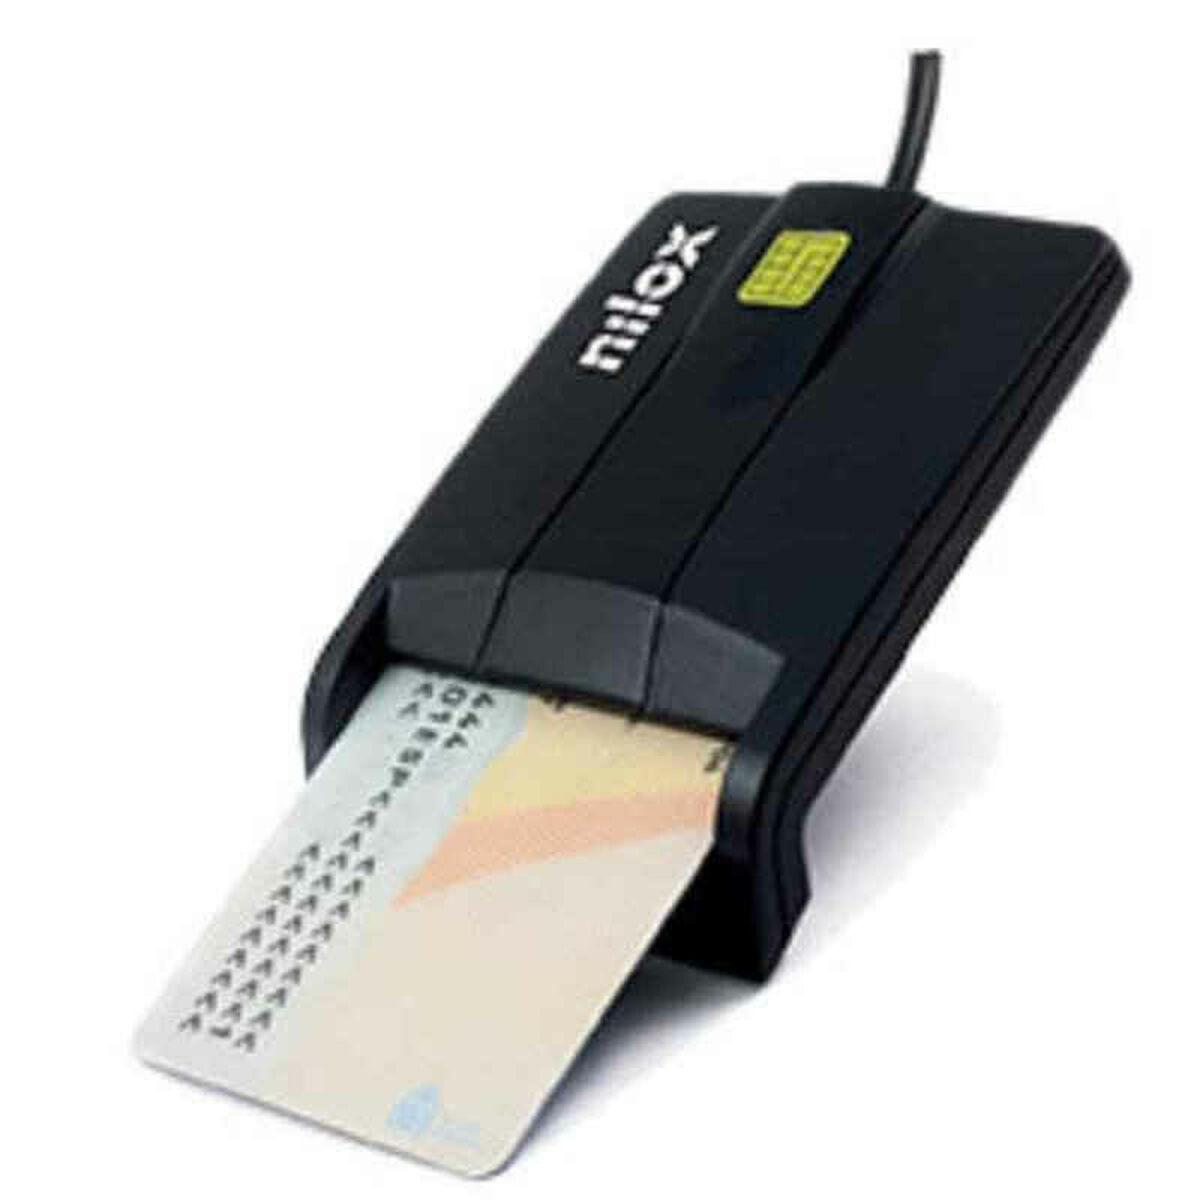 Electronique Nilox NXLD001 CNI Card Reader (ID card) Black